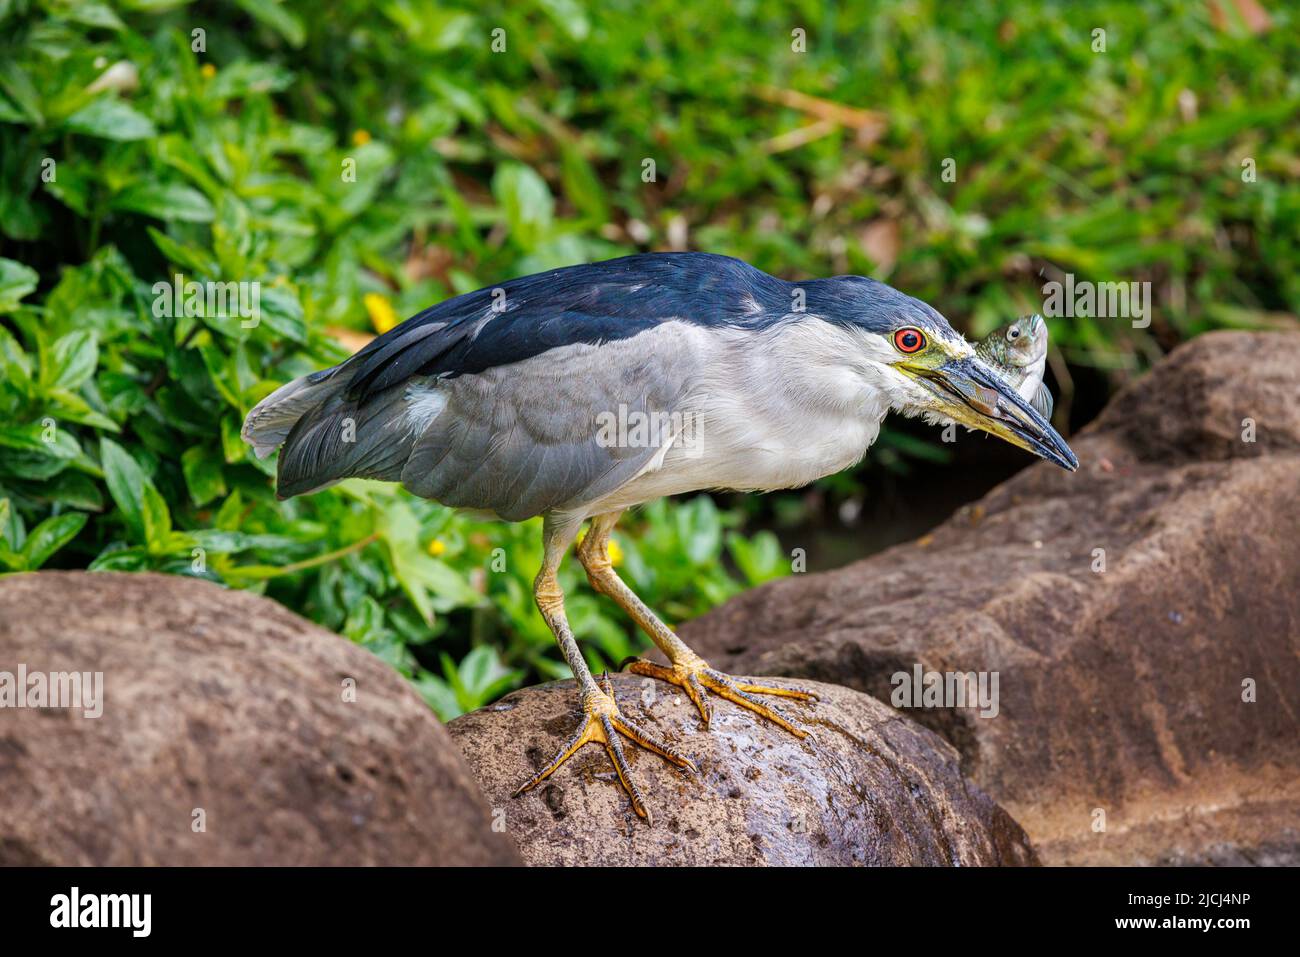 This black-crowned night heron, Nycticorax nycticorax, has caught a tilapia in a pond on Maui, Hawaii. The Hawaiian name for this species is Auku'u. Stock Photo